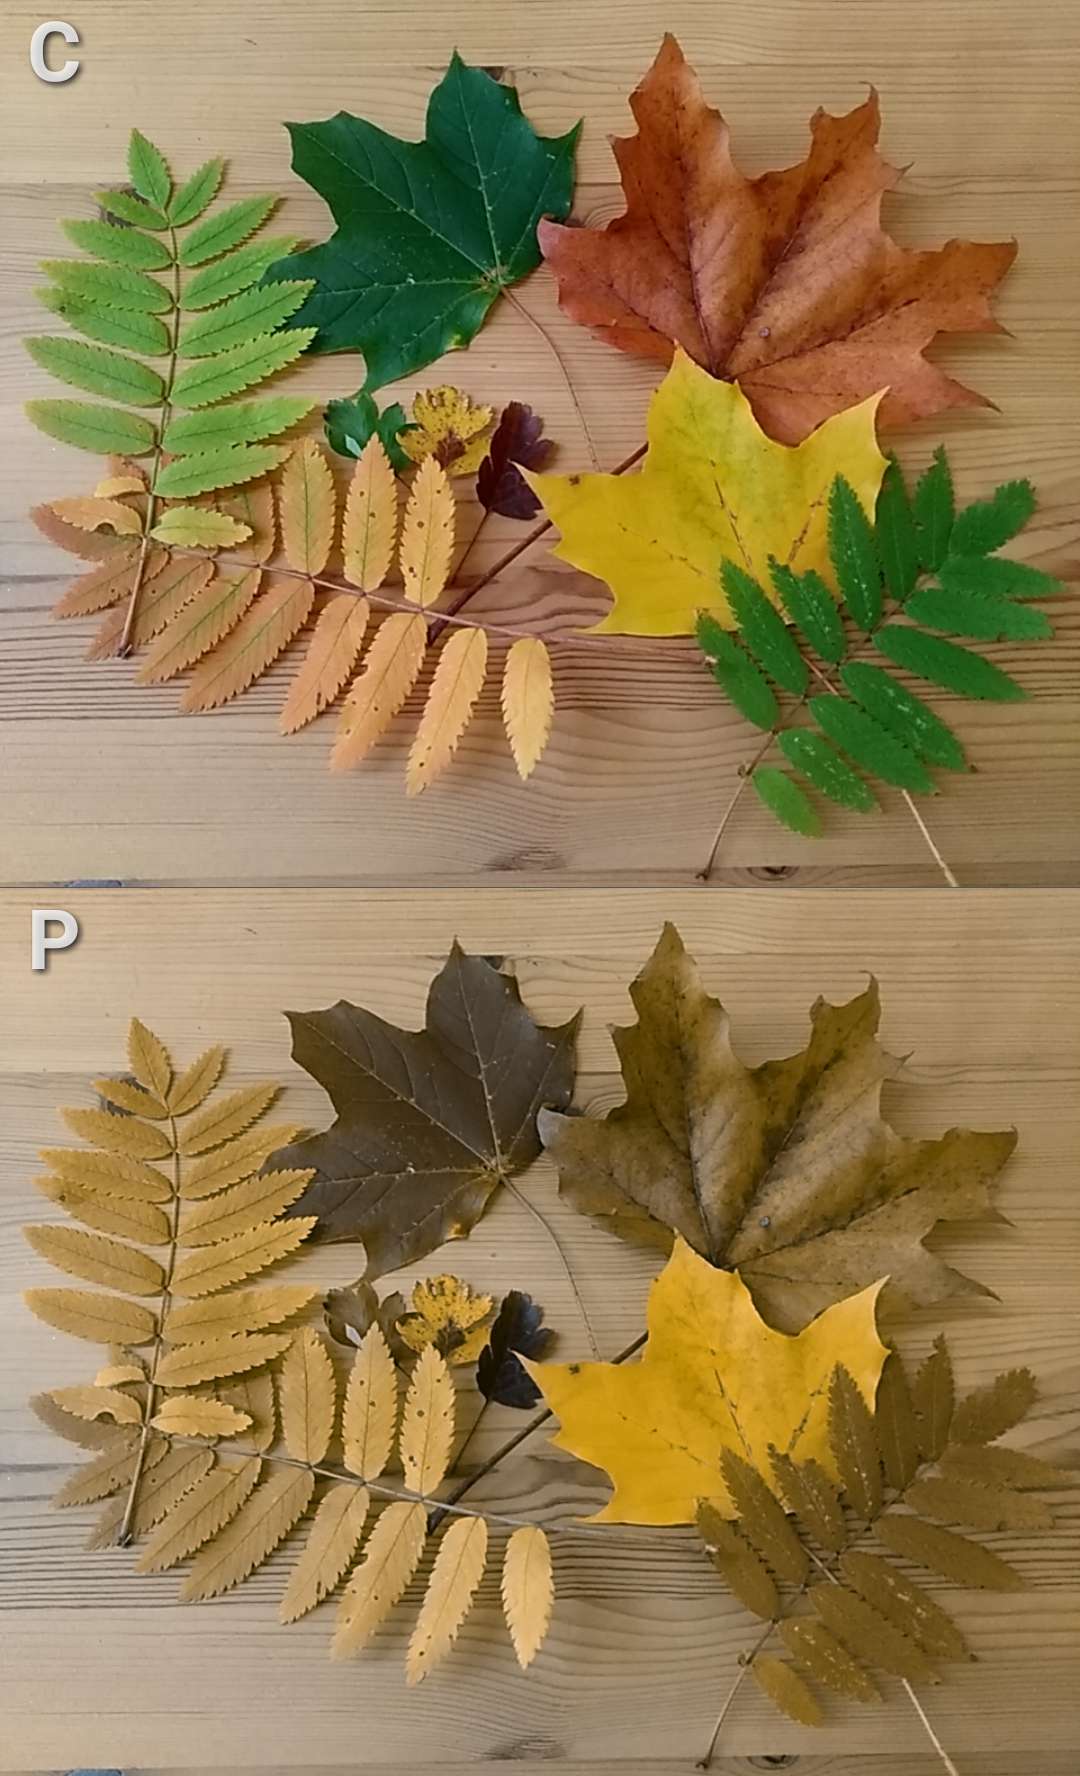 At the top of the image, there are a group of leaves that are all different colours, showing how people without colour blindness would see them. Underneath, there are the exact same leaves, but they're not as brightly coloured and show how someone with colour blindness would see the leaves.